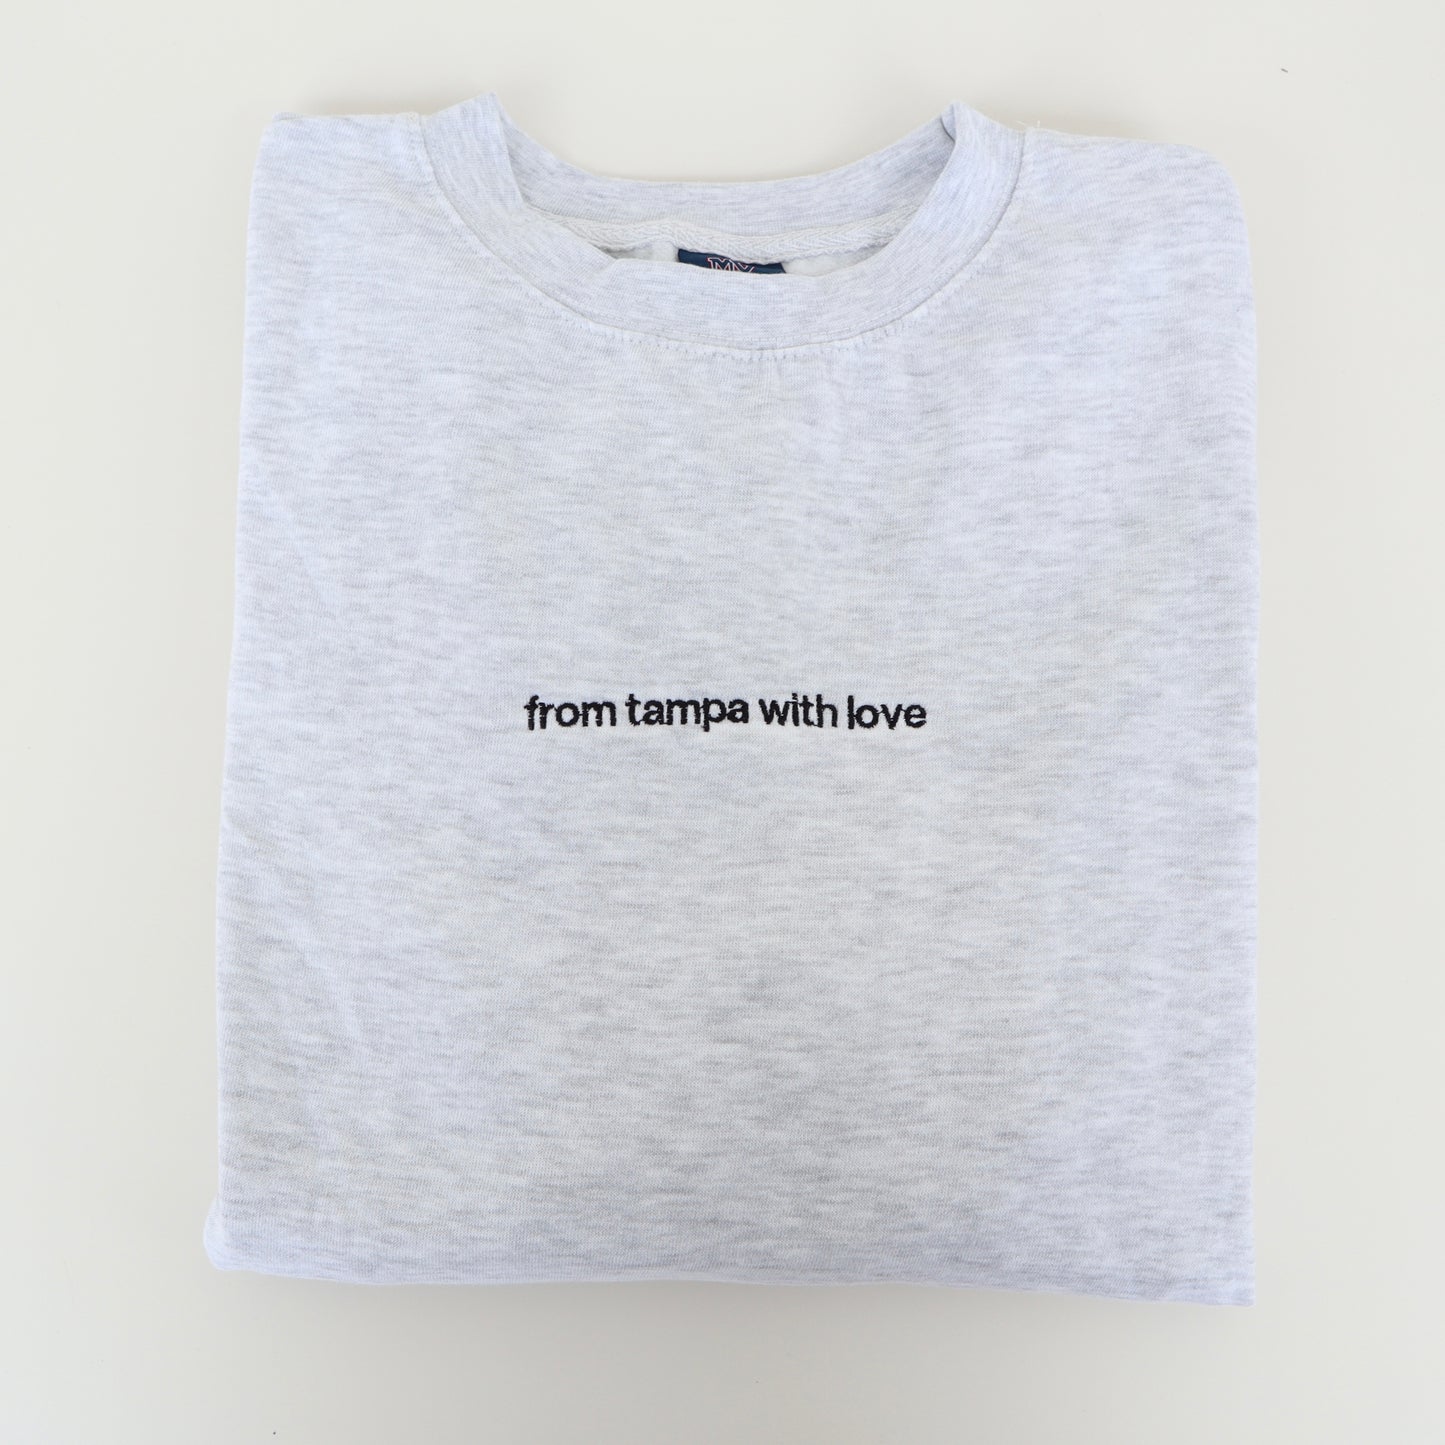 ‘from tampa with love’ Crewneck